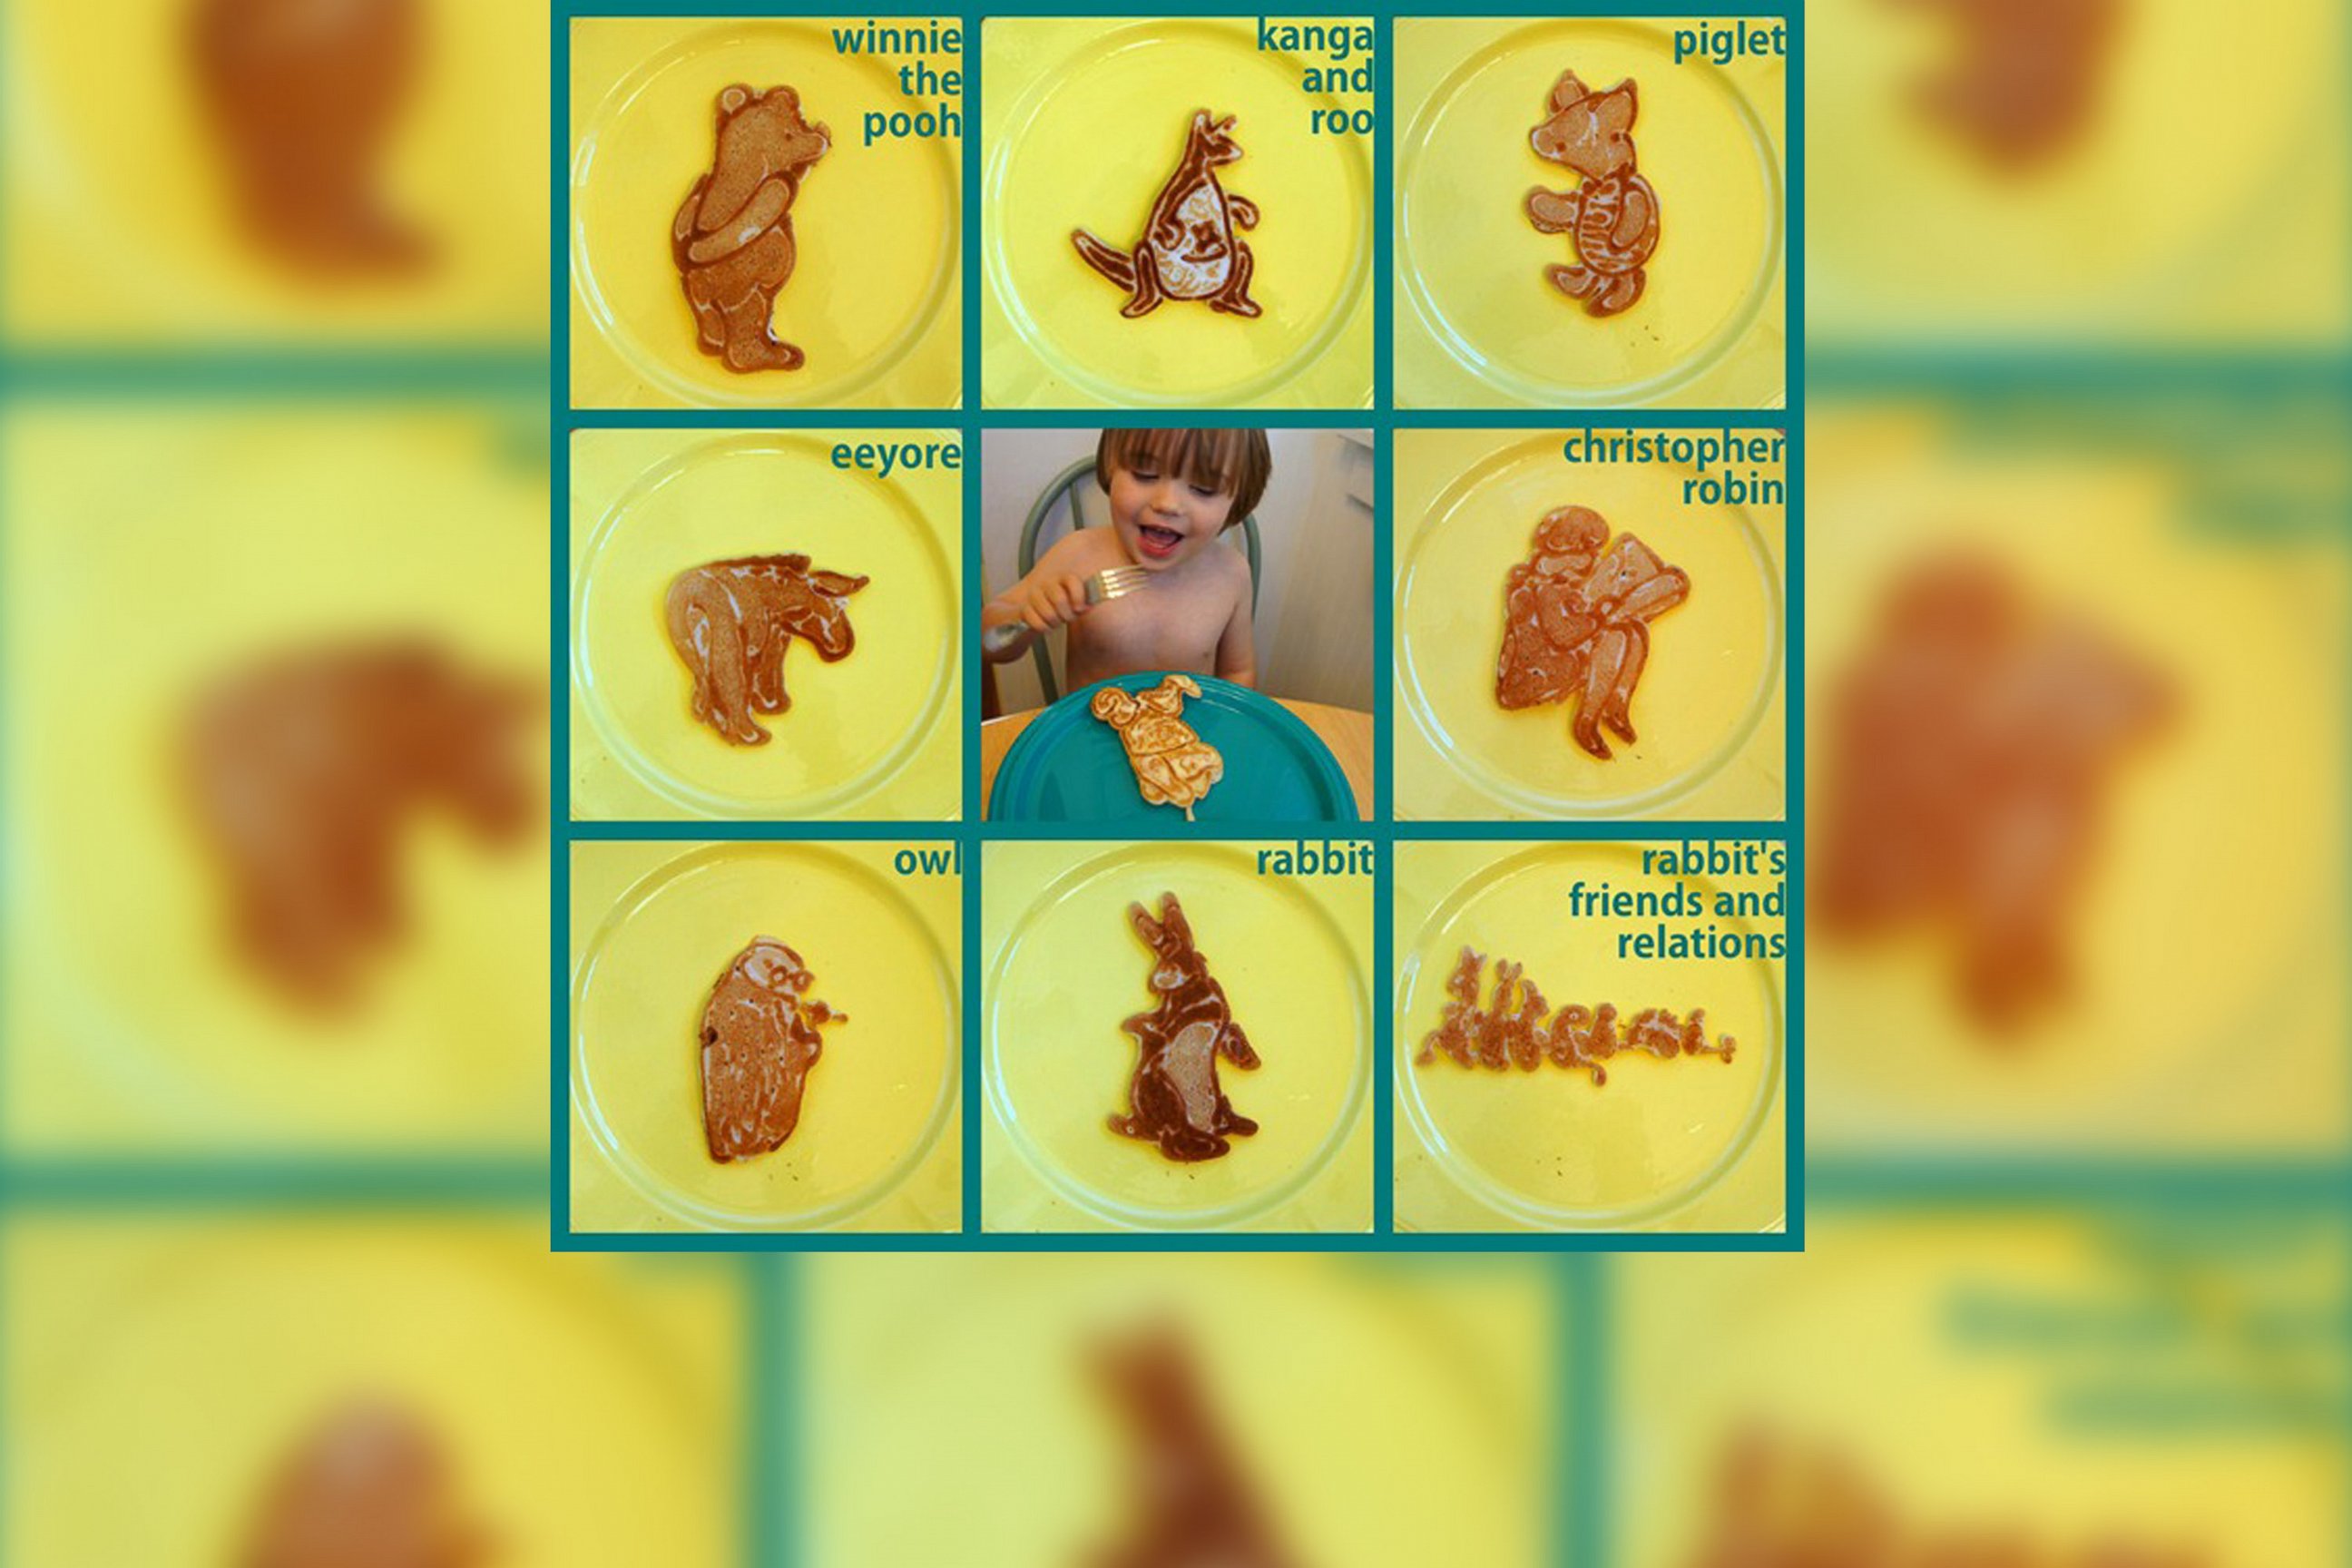 PHOTO: Winnie the Pooh characters are portrayed in pancake art made by illustrator Nathan Shields for his children.